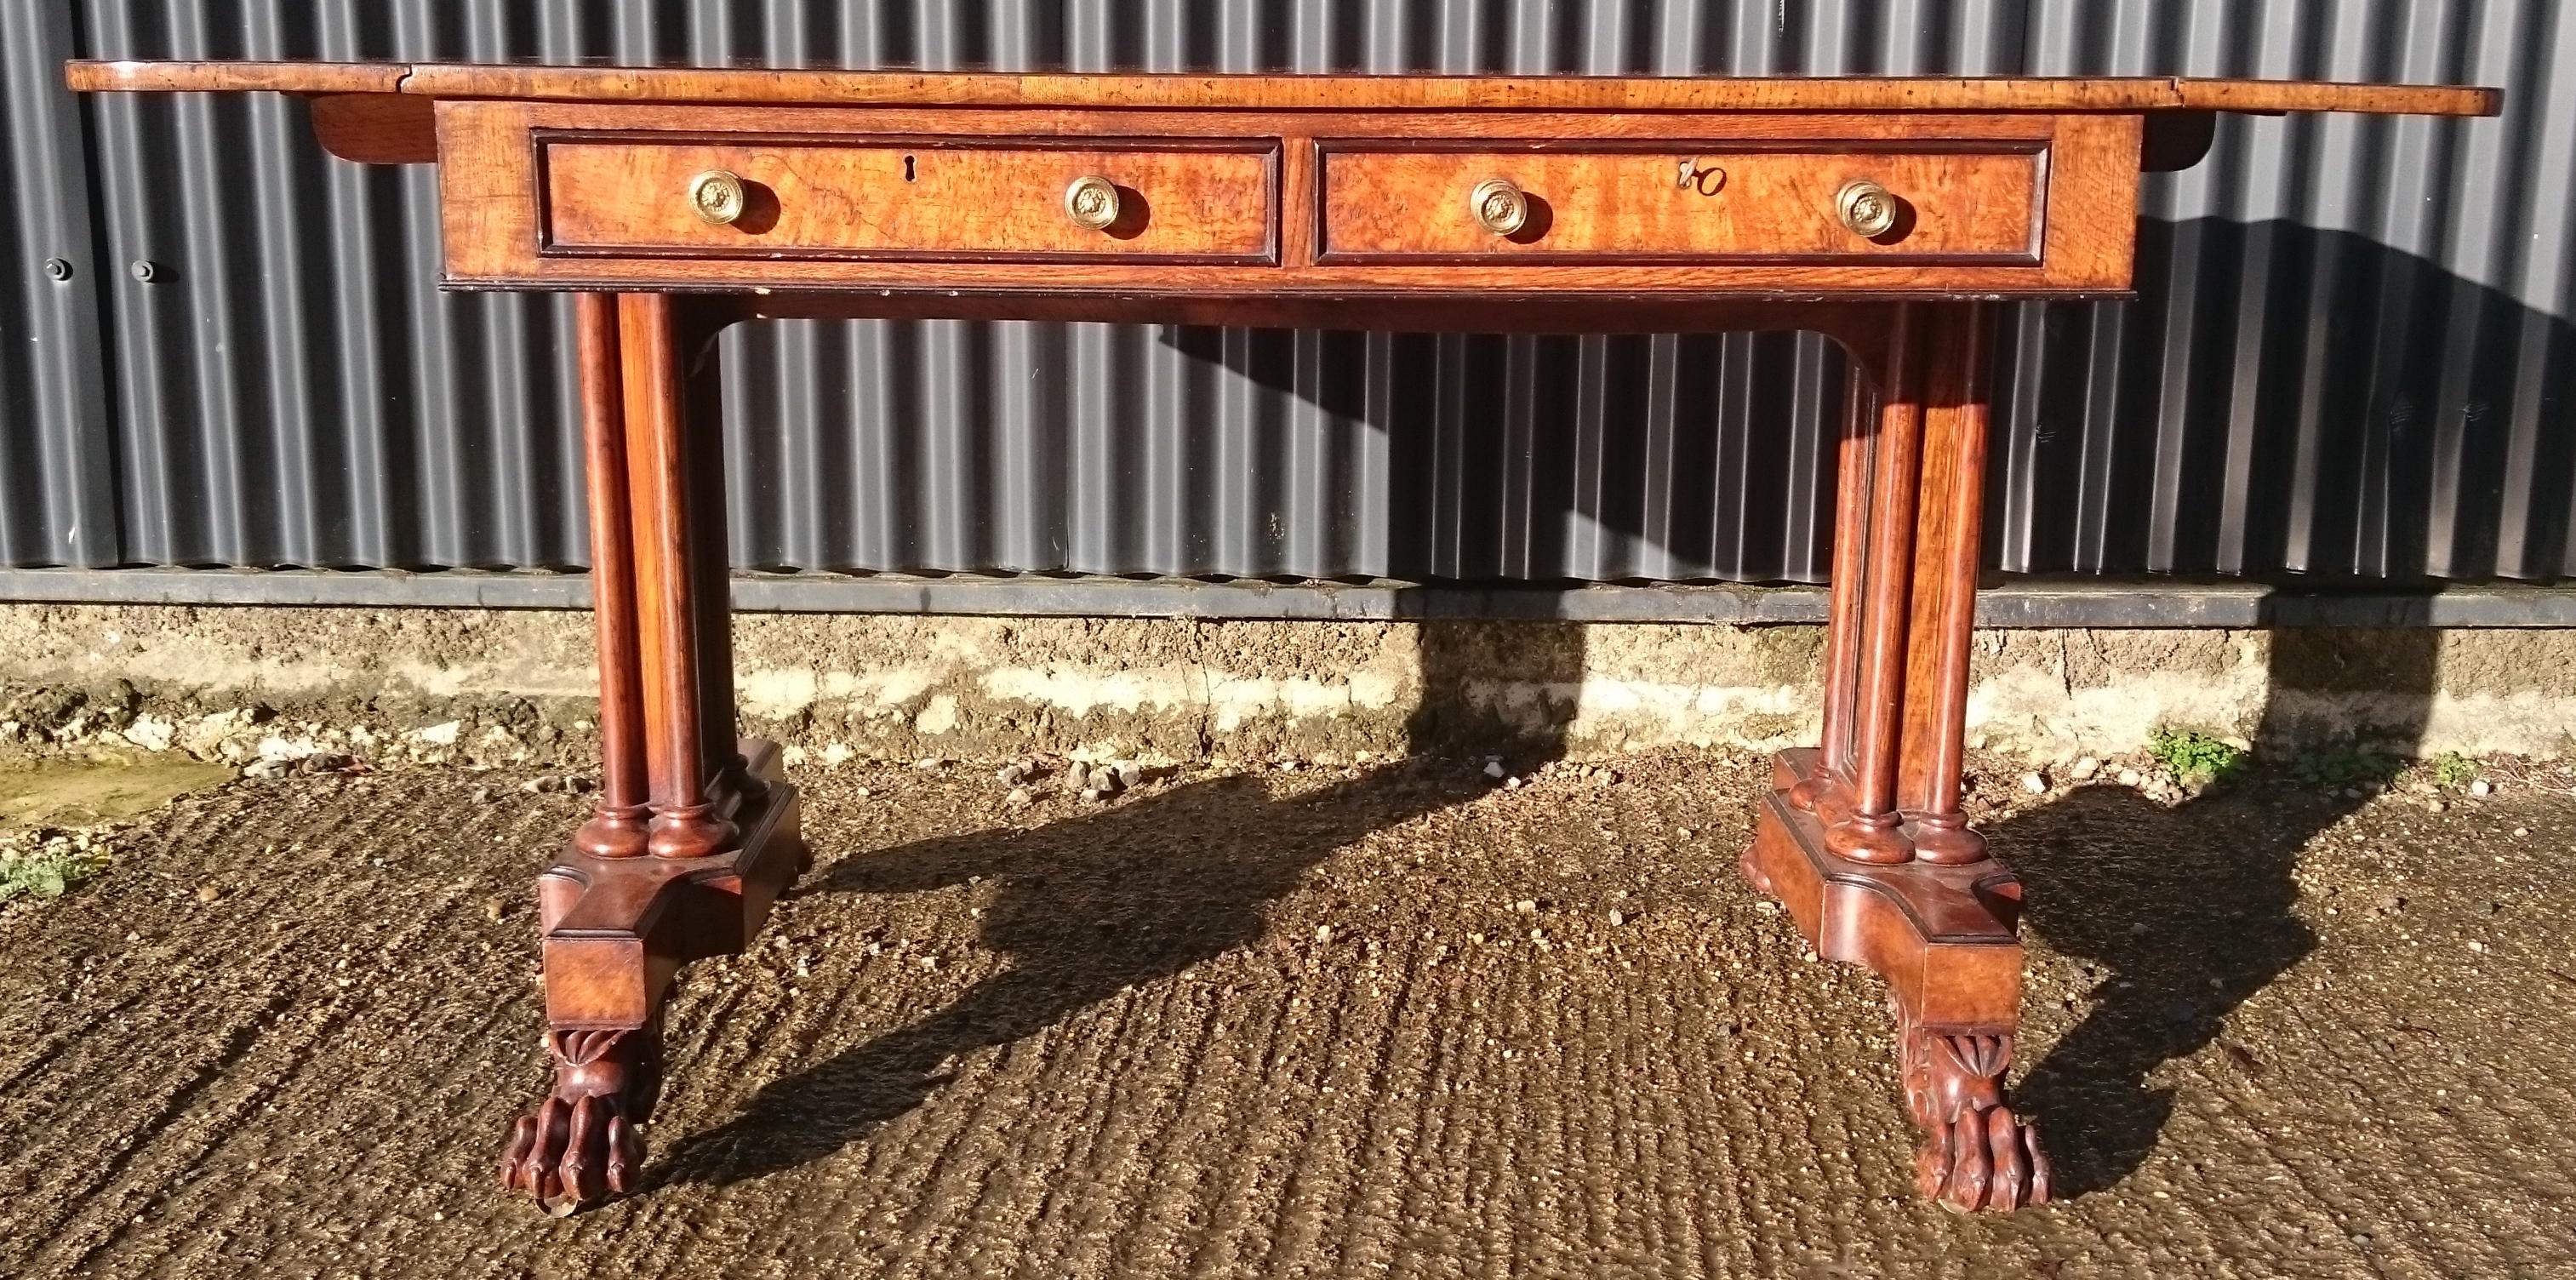 Very unusual and very fine quality Regency sofa table made of burr elm. This table is exceptionally well made, with double lopers to support the ends, end support leg structure, cross banding, stringing, very precise dovetails and very crisp carving